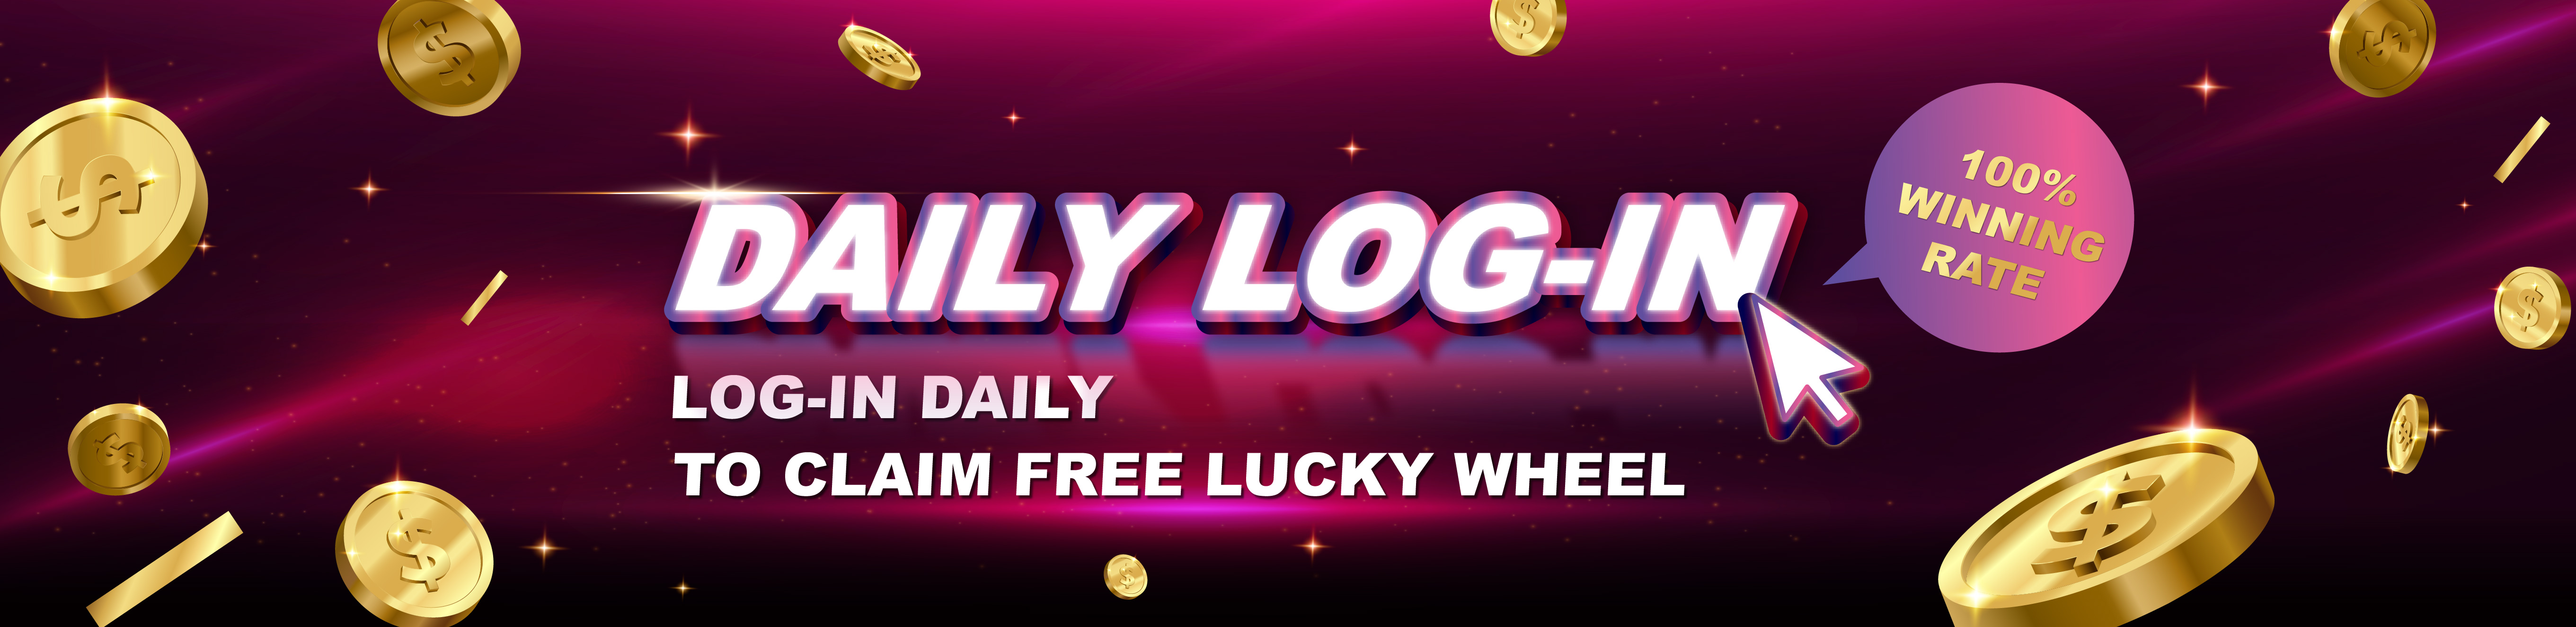 daily-log-in_banner